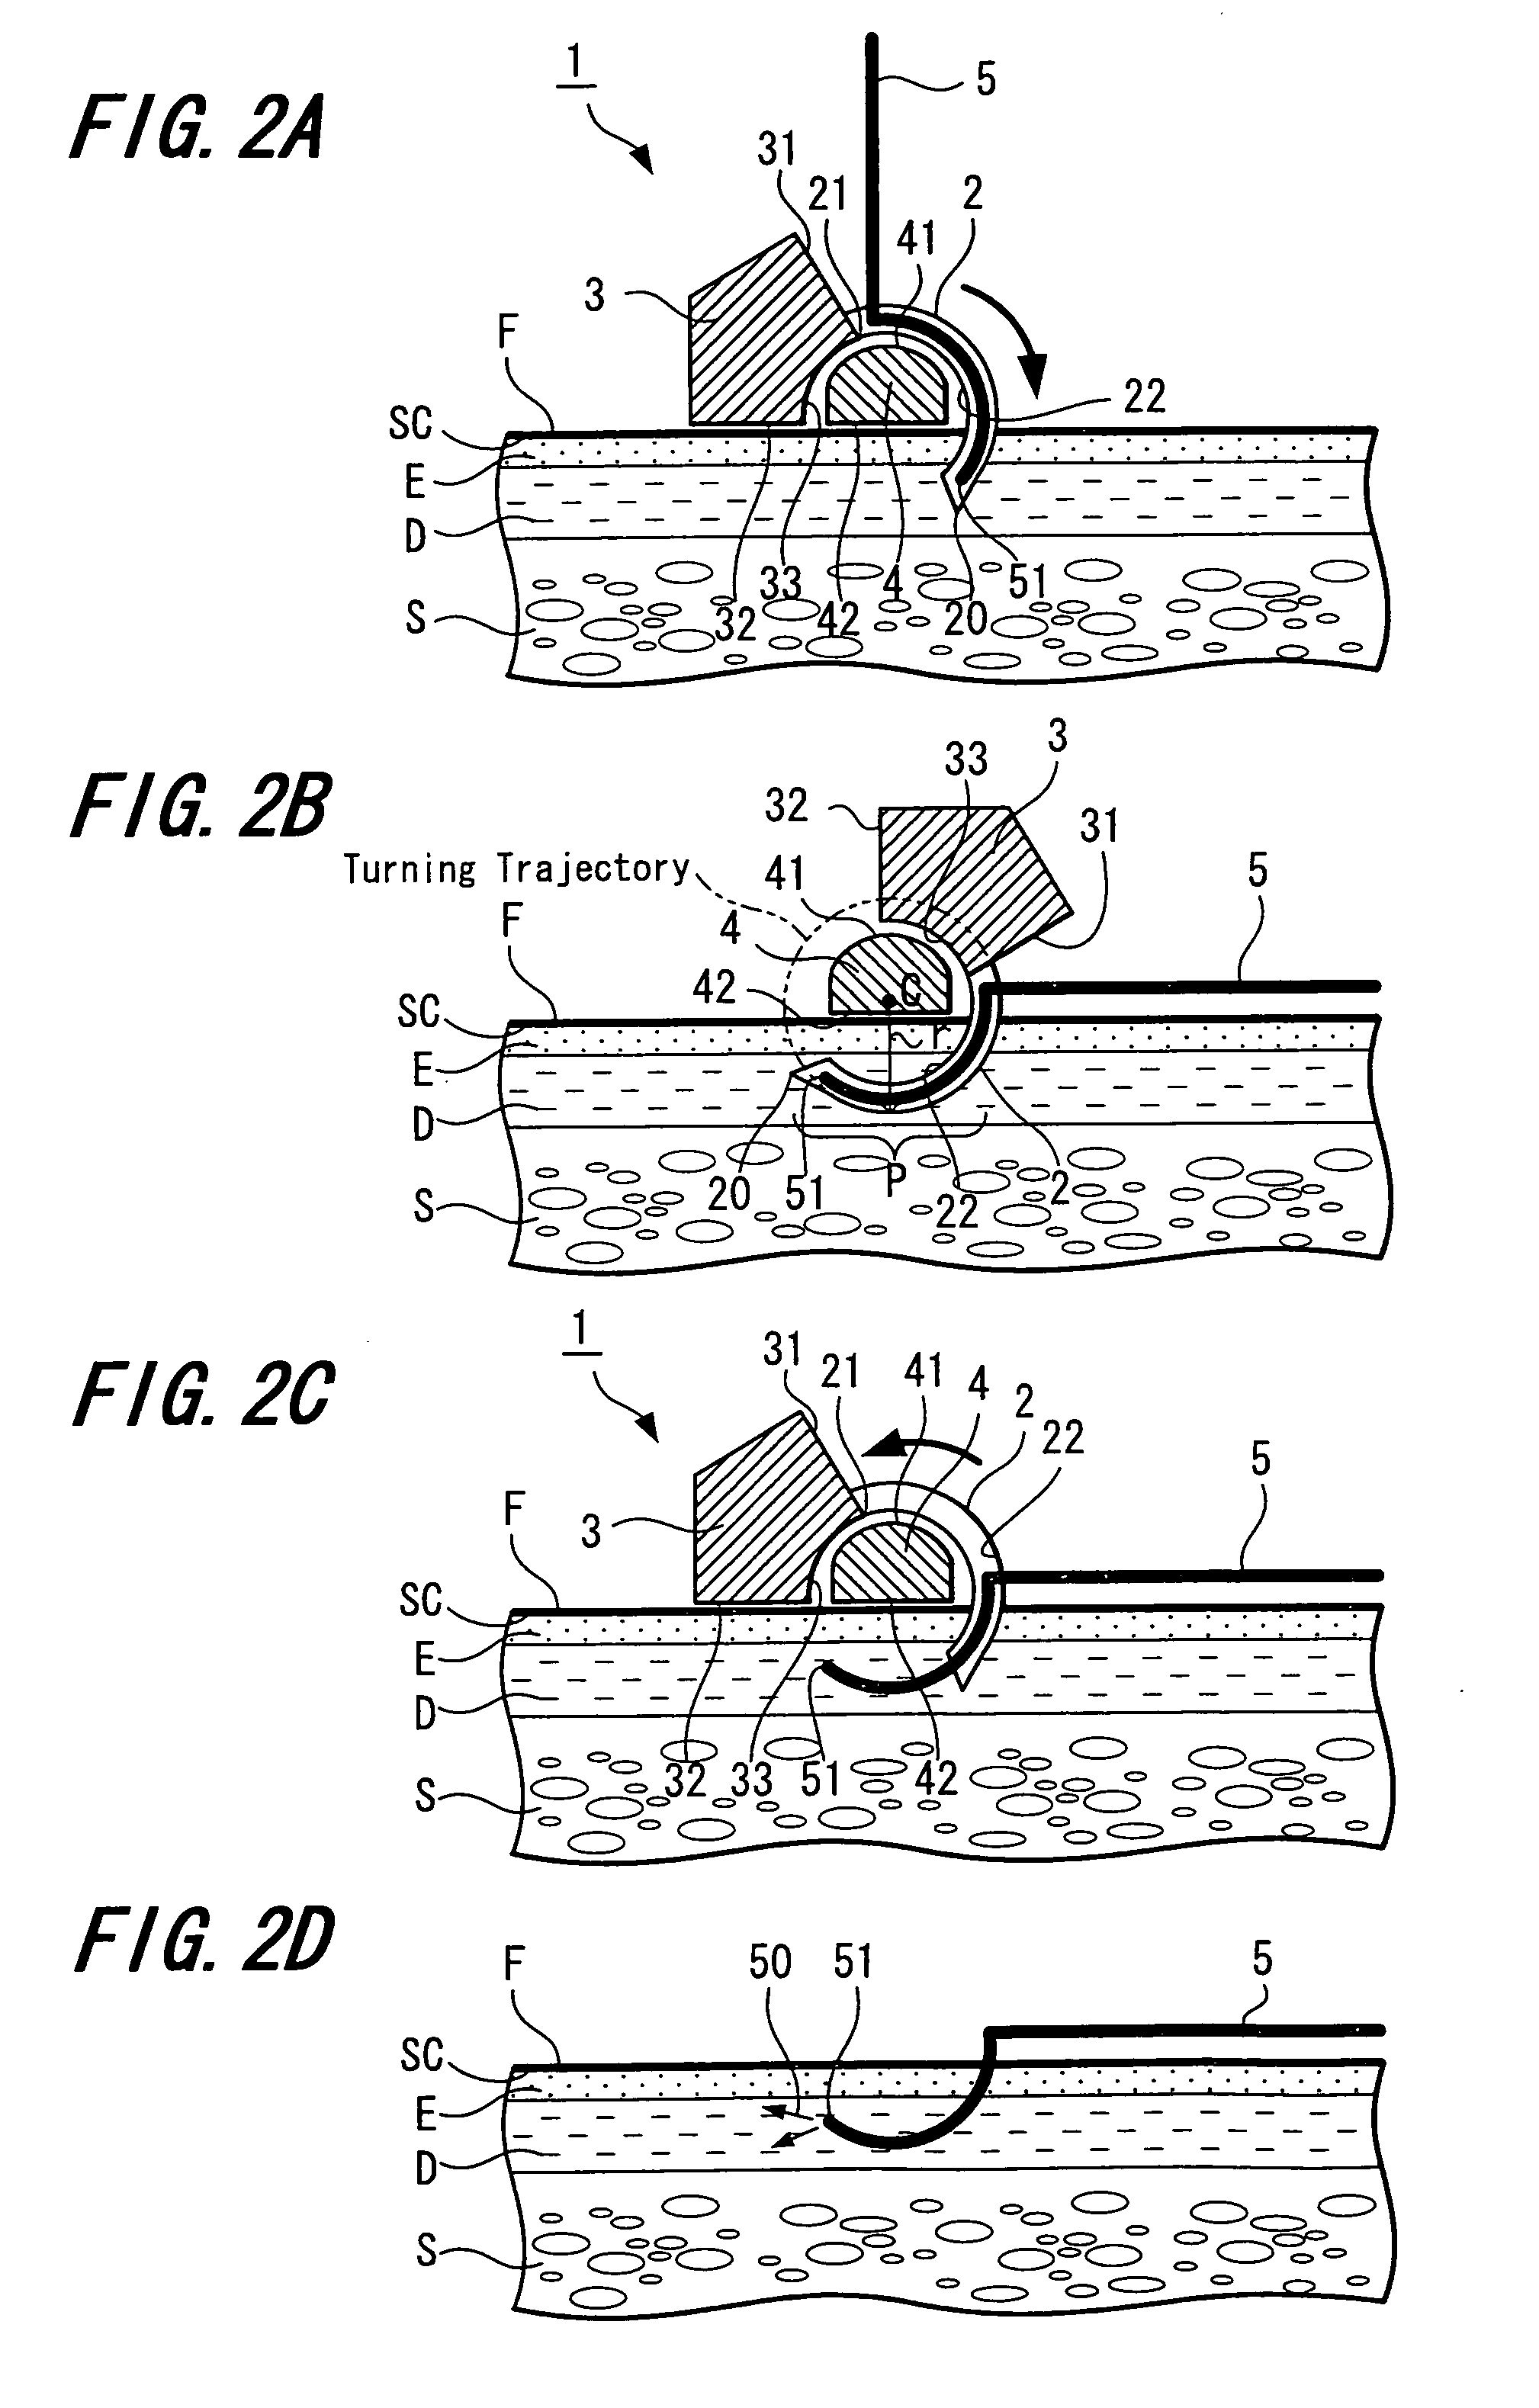 Puncture device